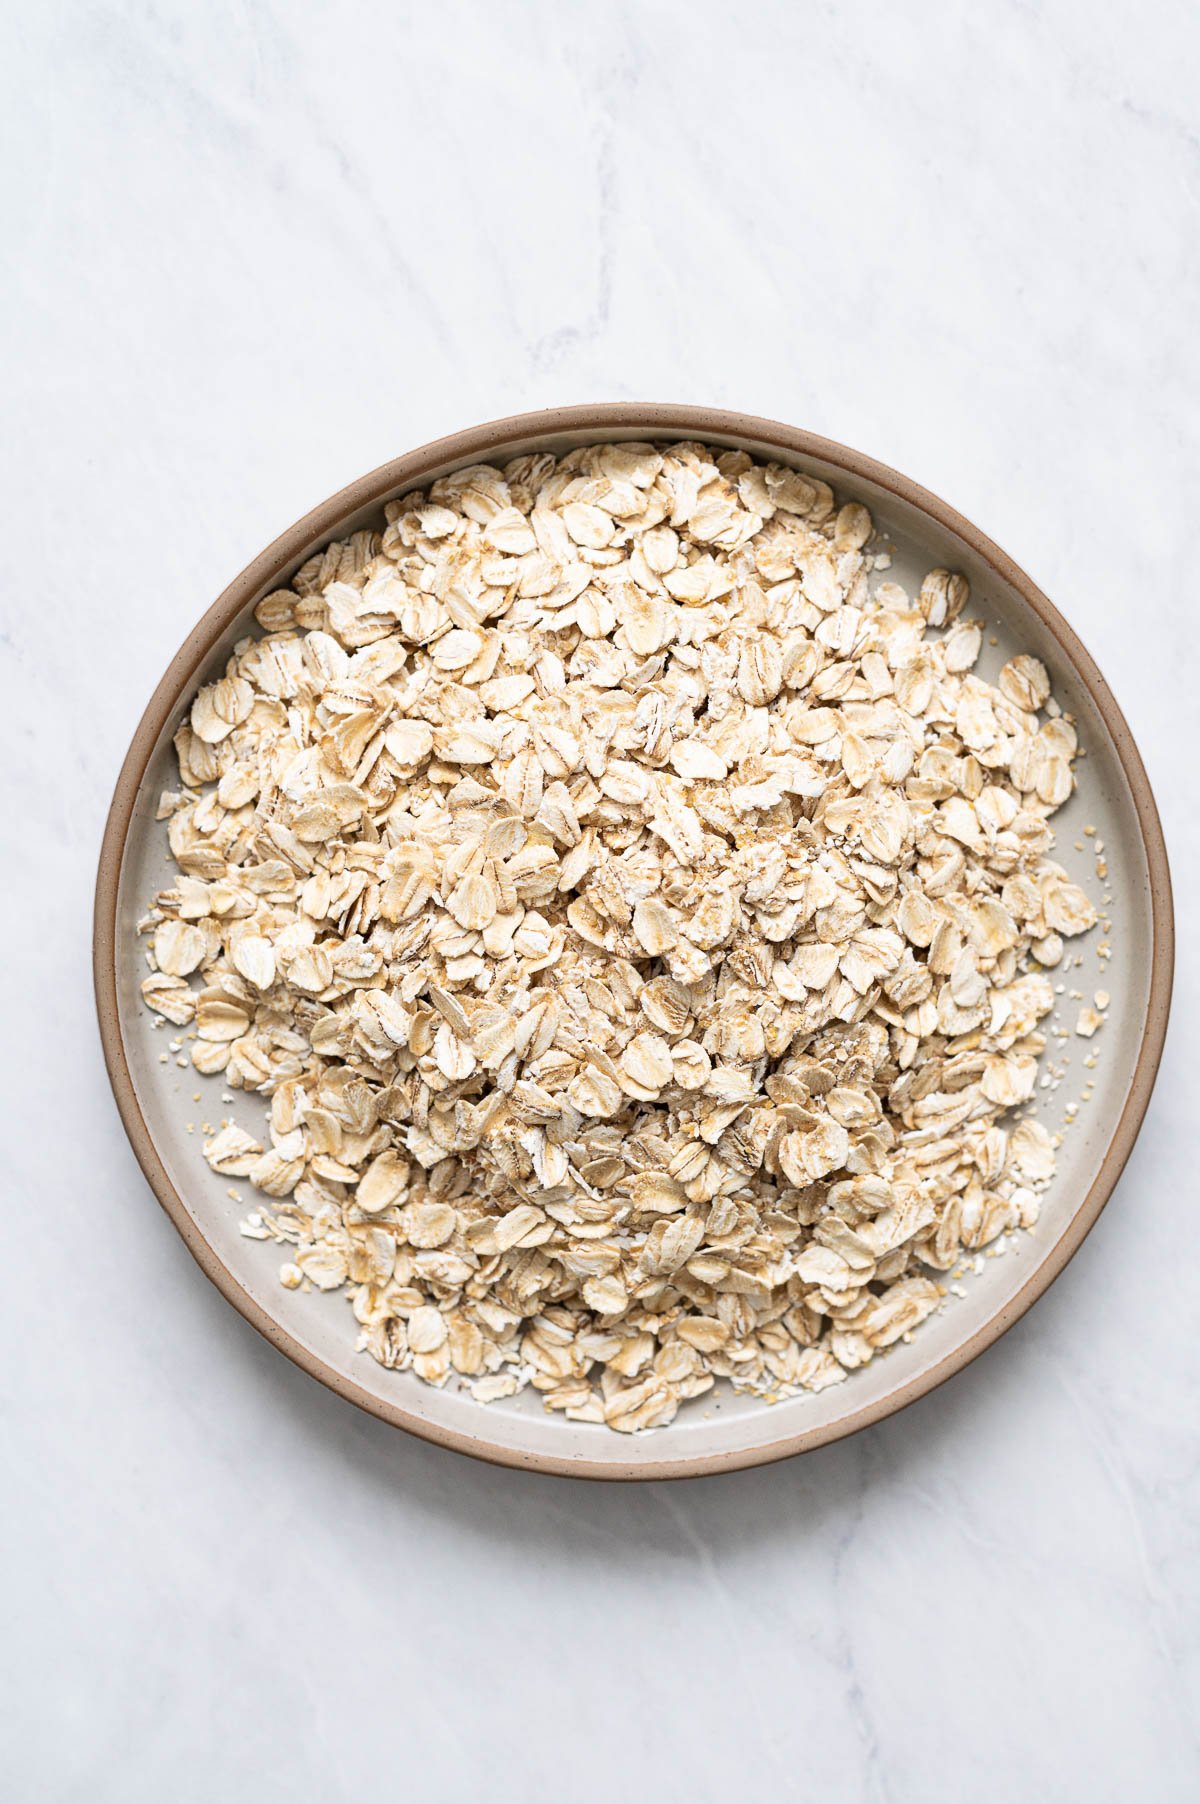 Rolled oats on a plate.